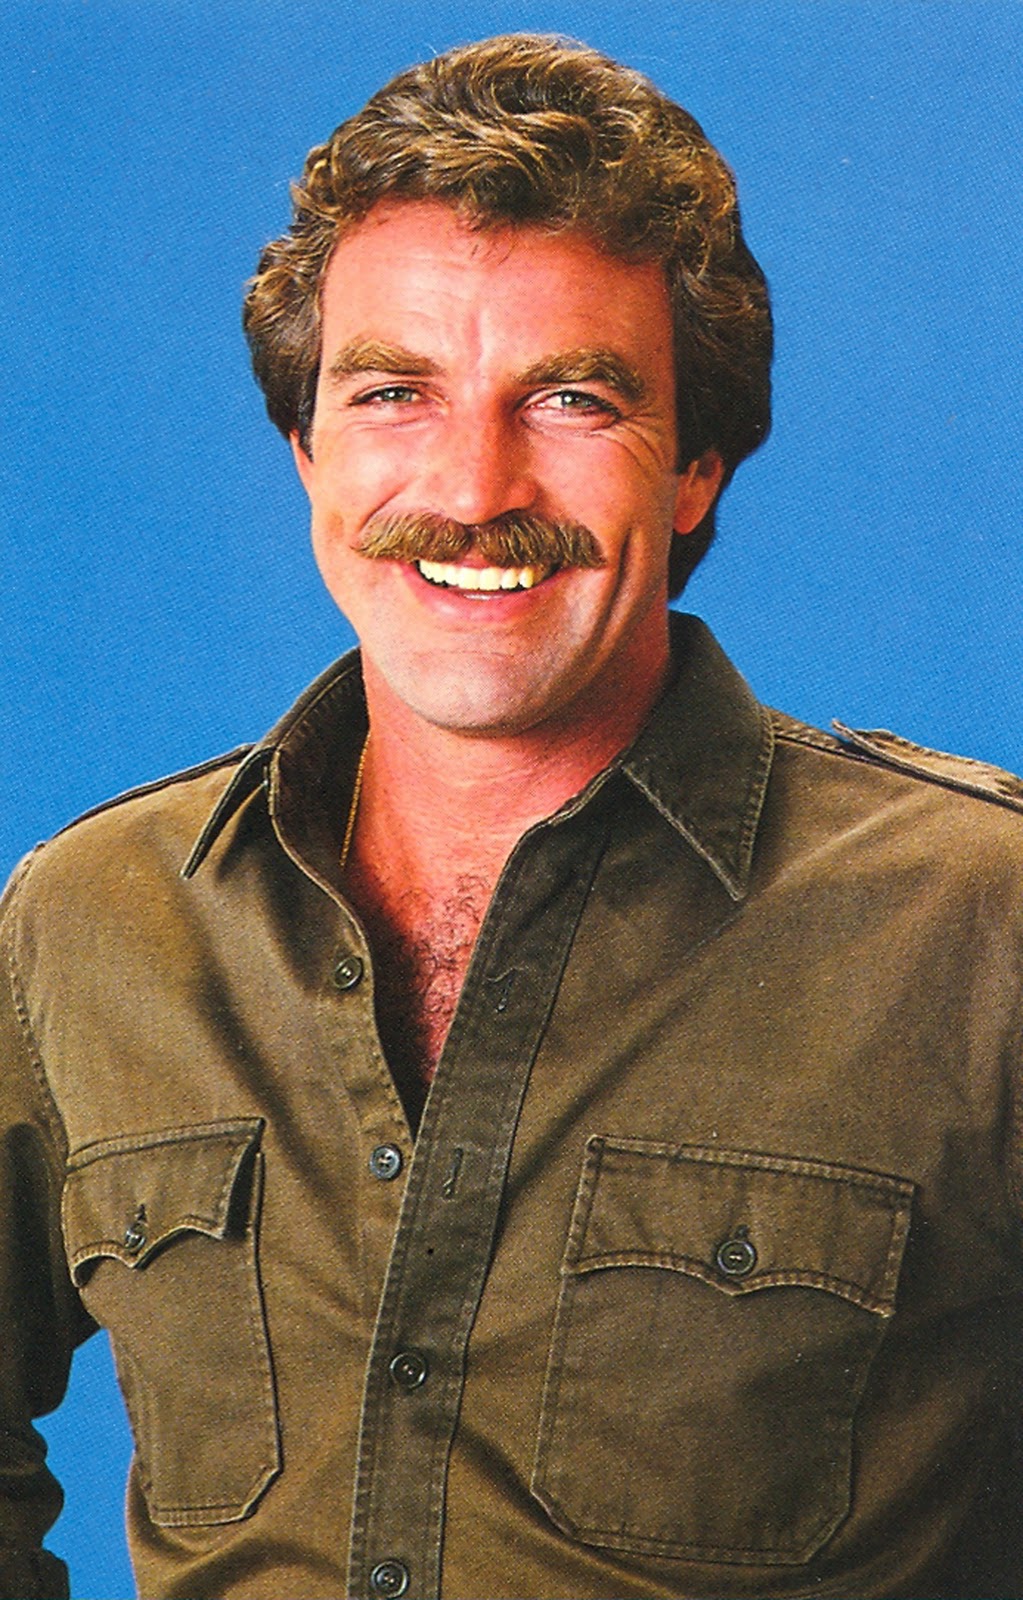 Tom selleck studied at L.a. valley college.